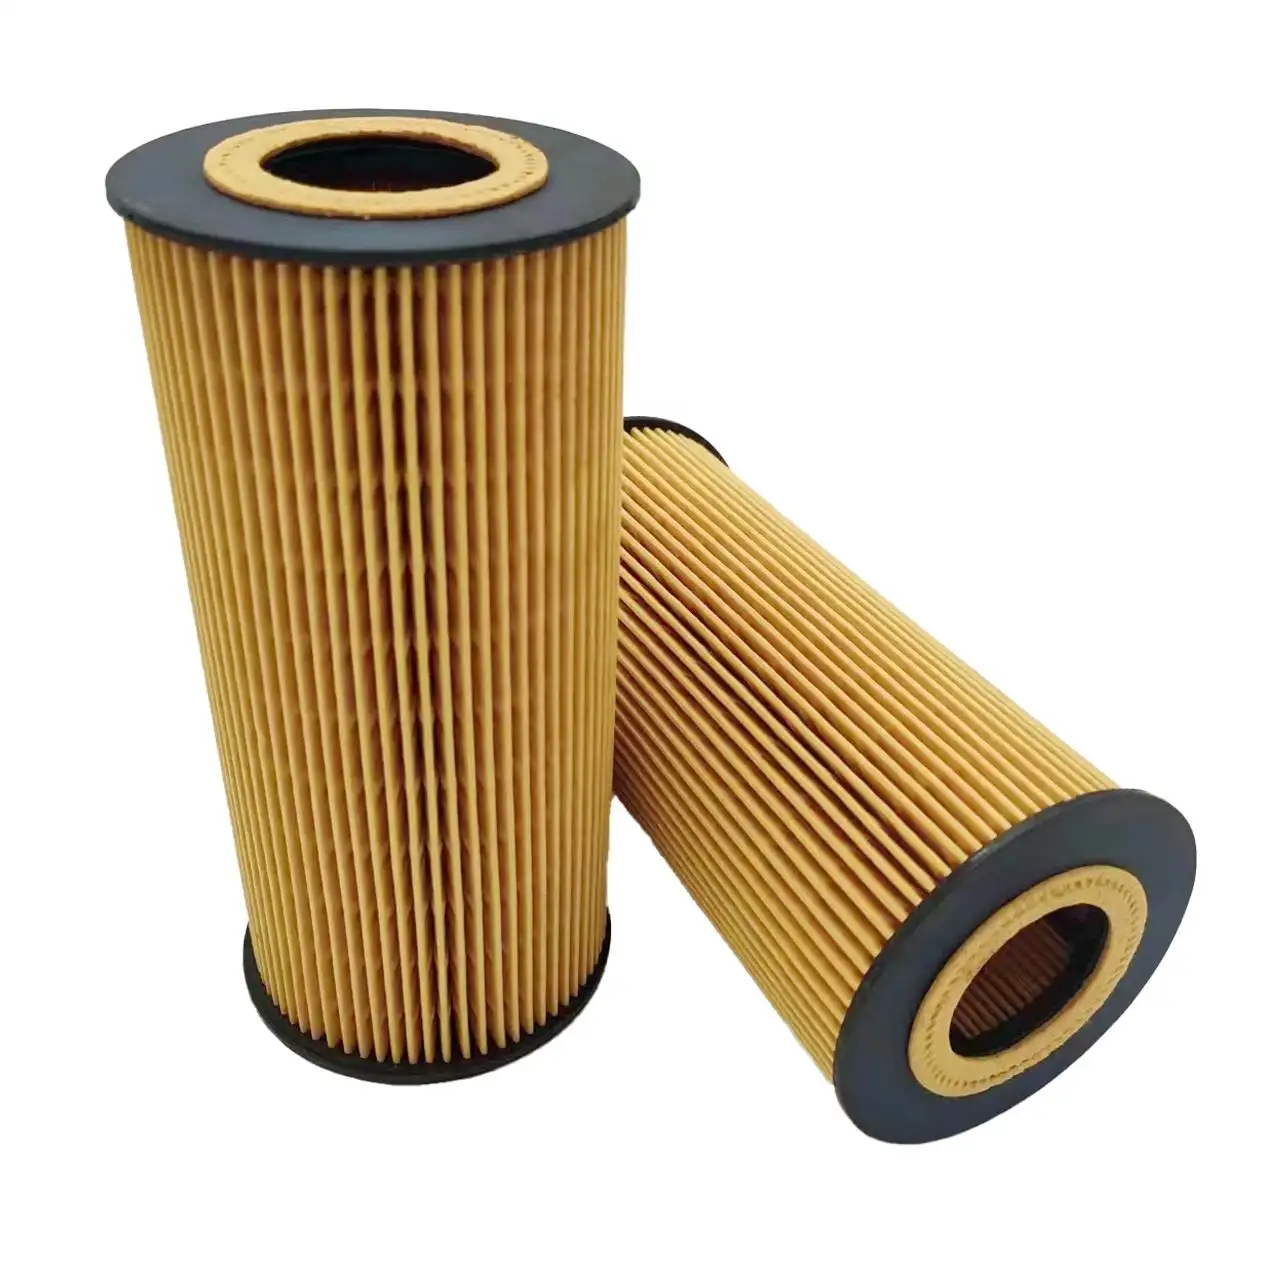 Wholesale High Quality New Diesel Engine Oil Filter 1518512 1296851 1393640 FOR SCANIA TRUCK